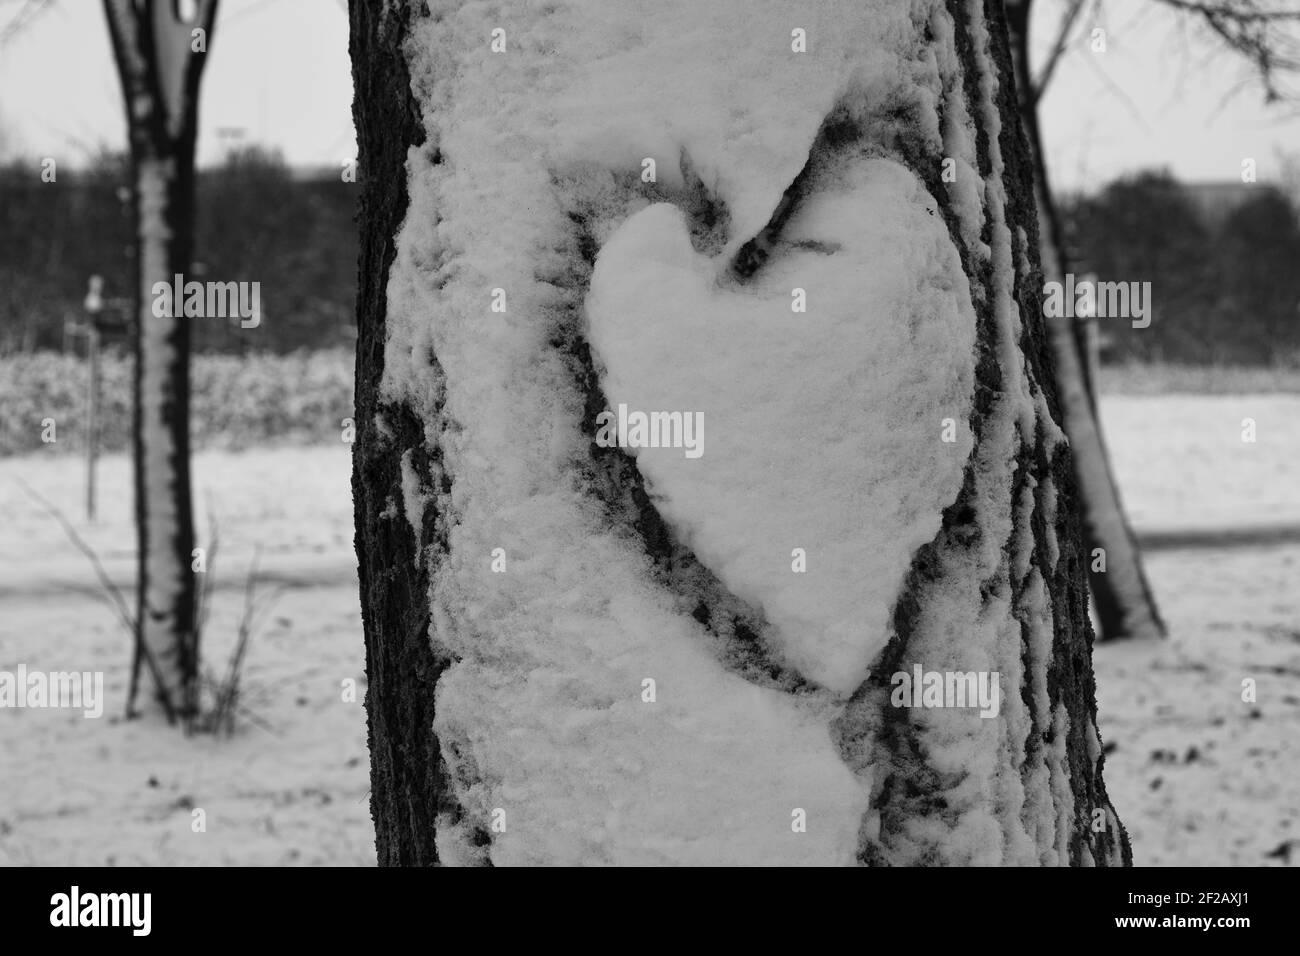 Heart in the snow, draw on tree covered in snow, heart shape draw in snow covered tree, love is in the air, romantic symbol, Stock Photo